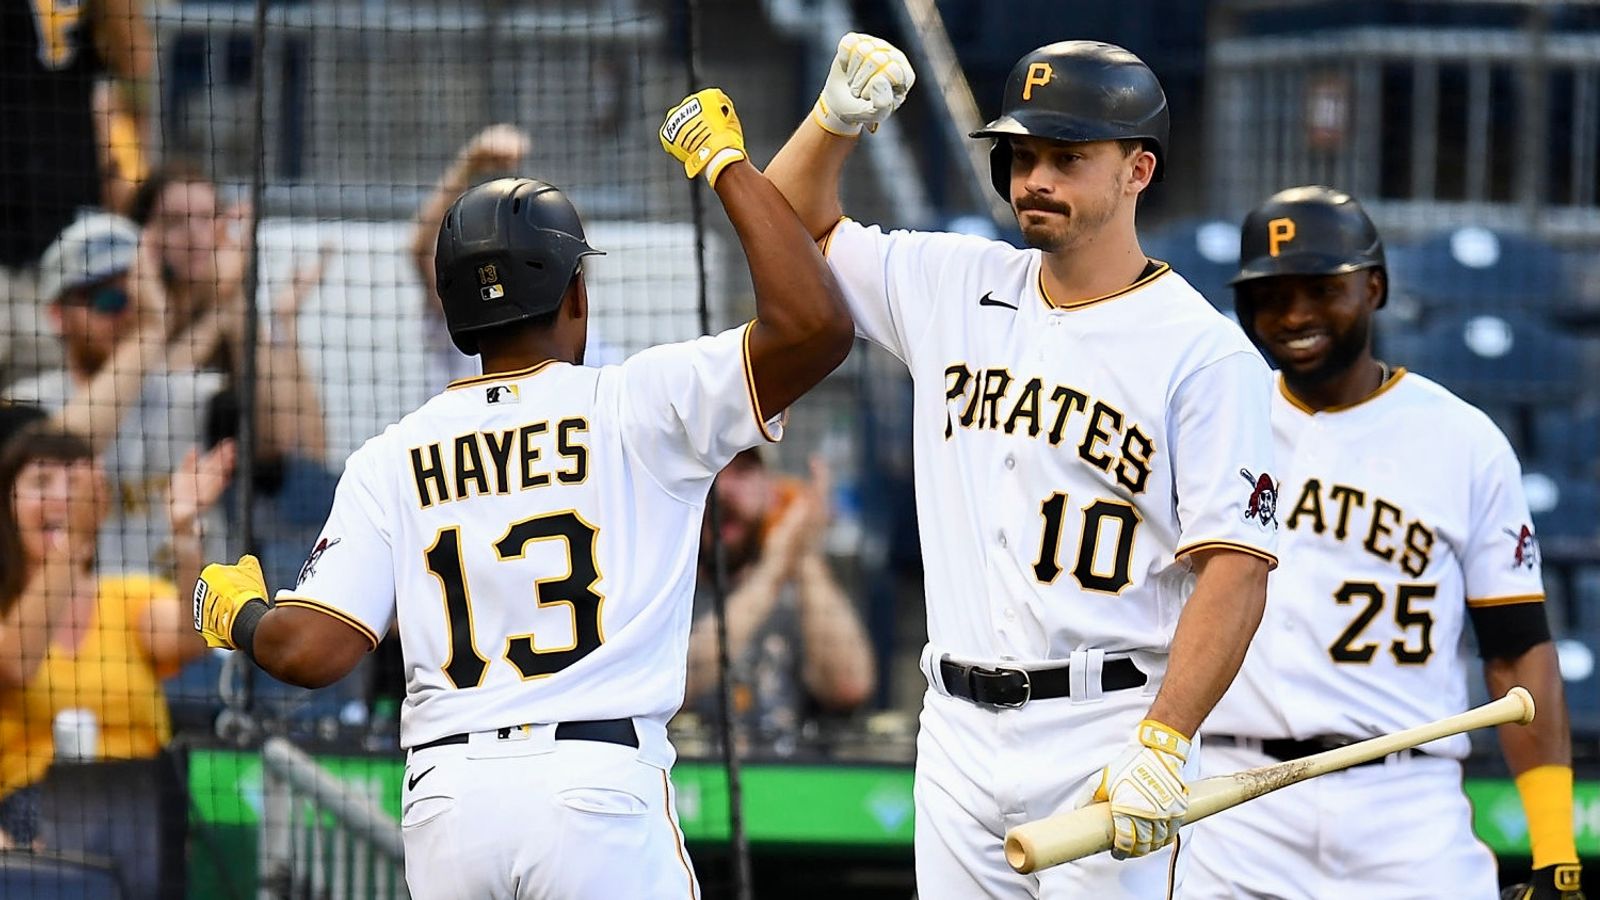 With Ke'Bryan Hayes back in fold, Pirates' lineup clicking up top